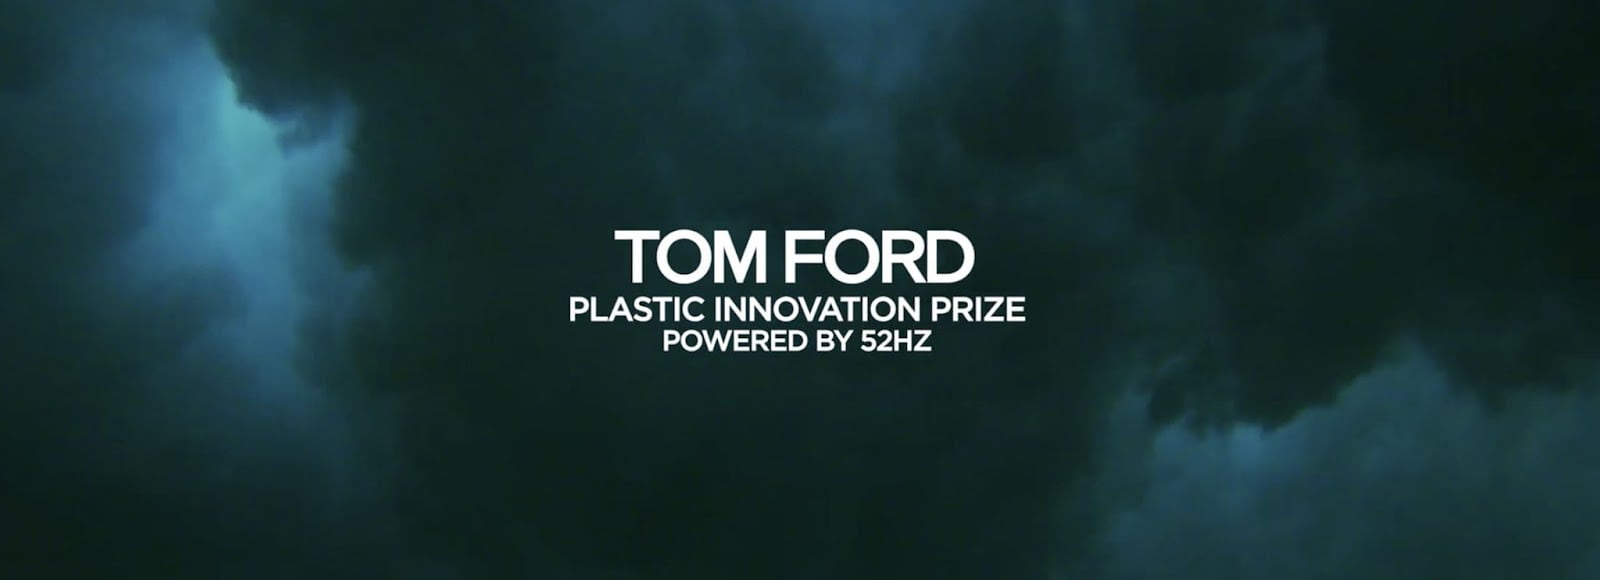 University of Cambridge spin-out, Xampla, announced as finalist for Tom Ford Plastic Innovation Prize by team of global investors